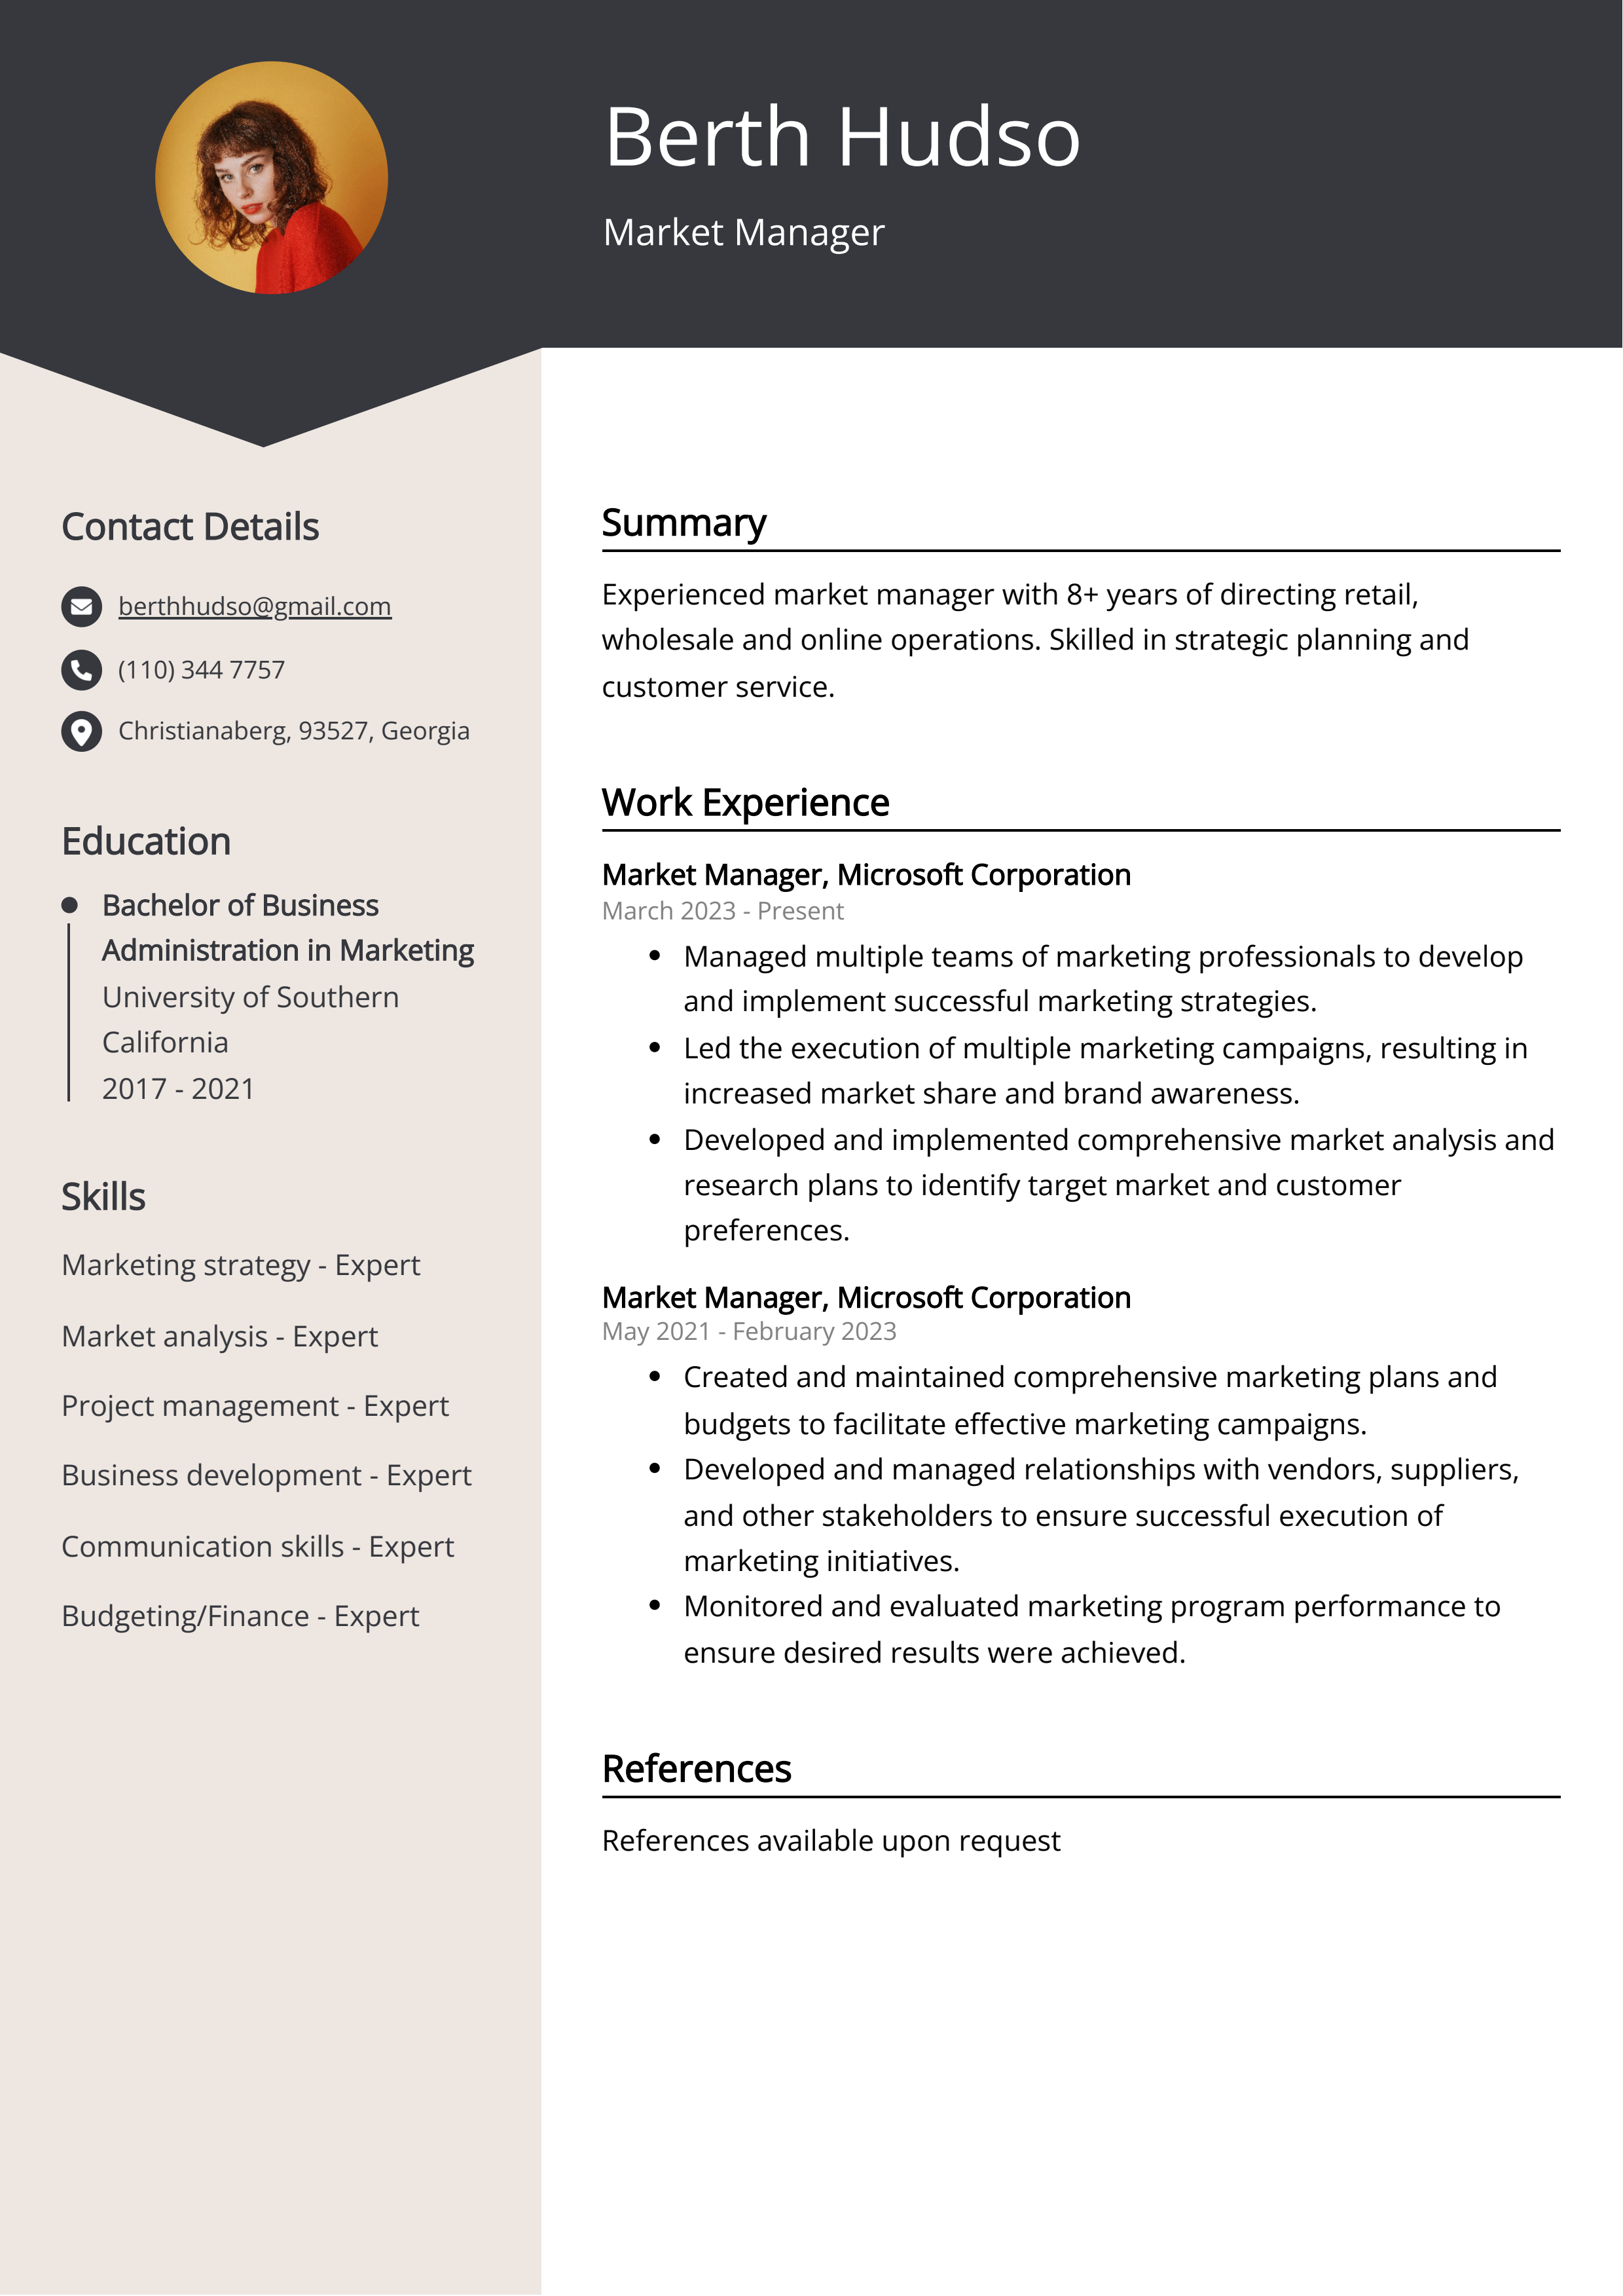 Market Manager Resume Example